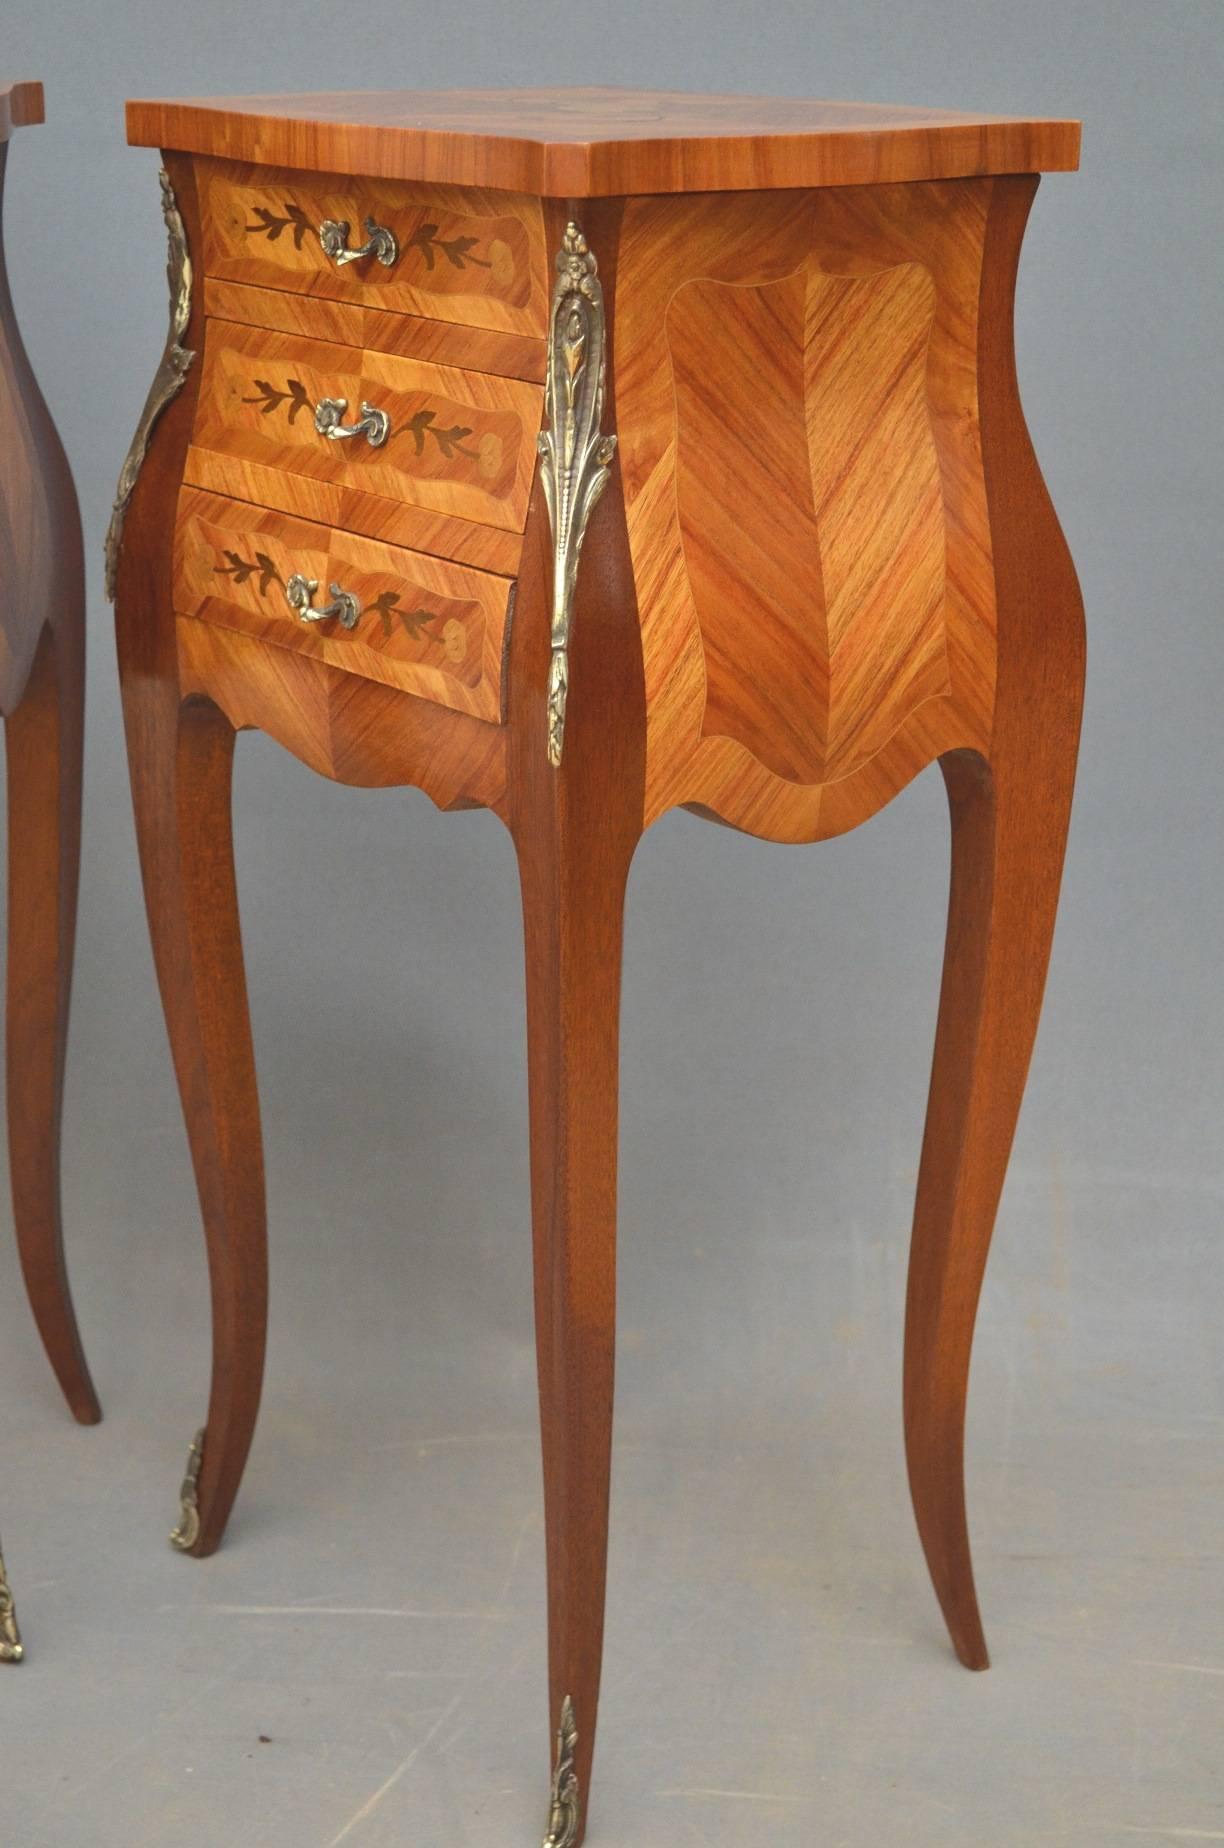 Early 20th Century Stunning Pair of Bedside Cabinets